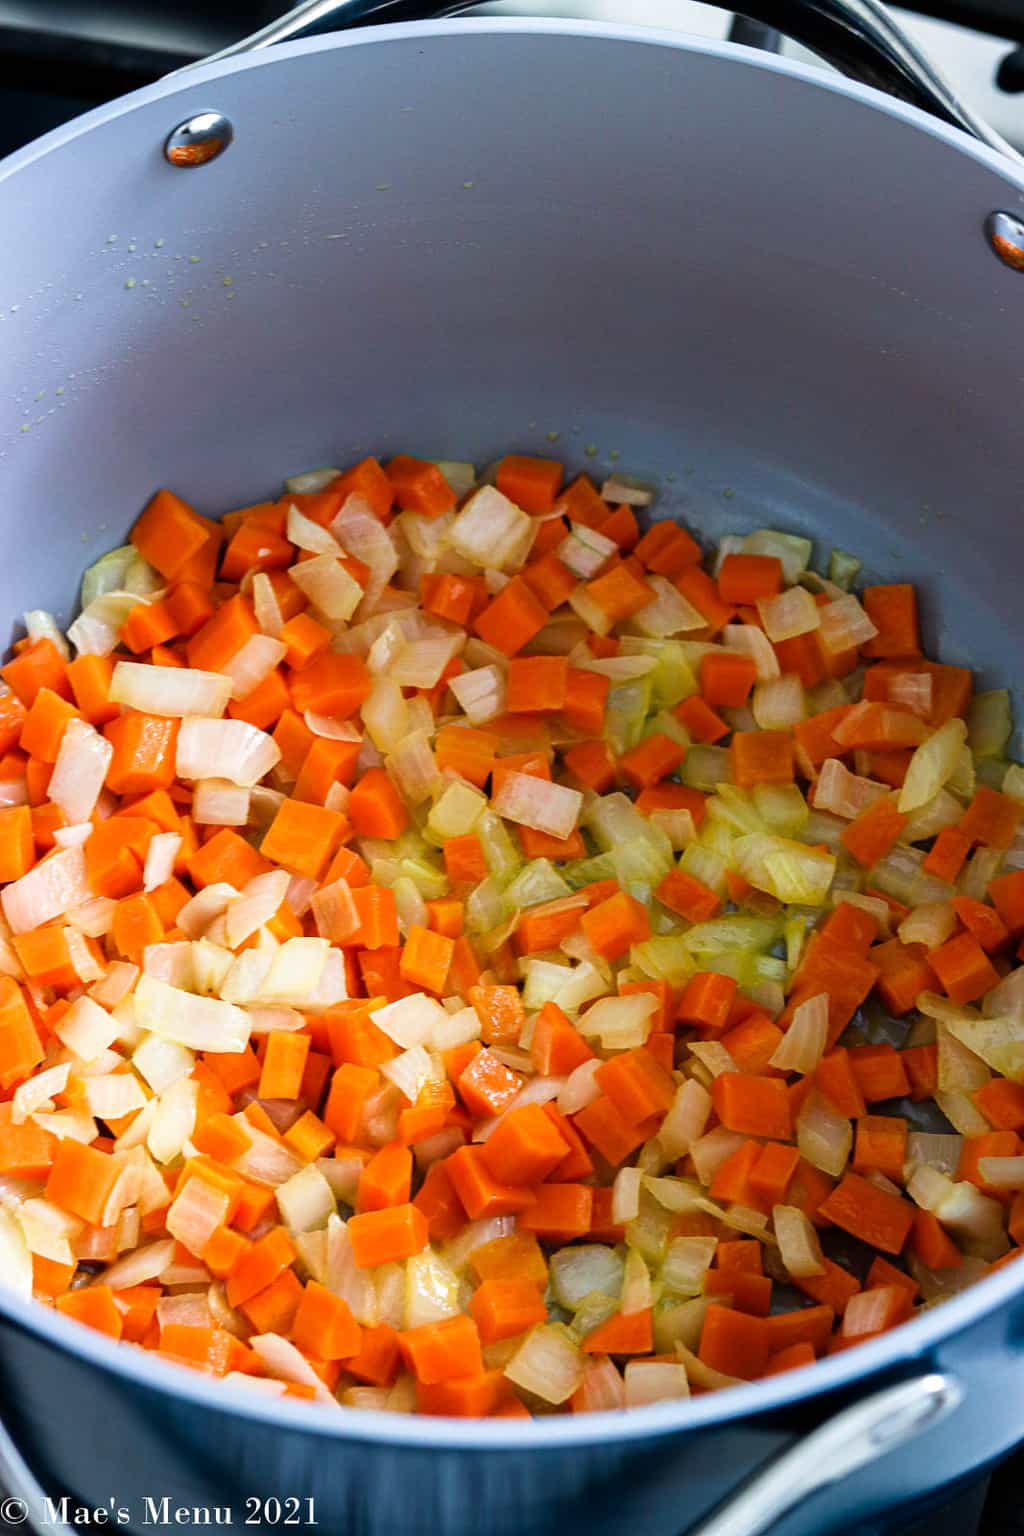 A stockpot of sauteed onion and carrots